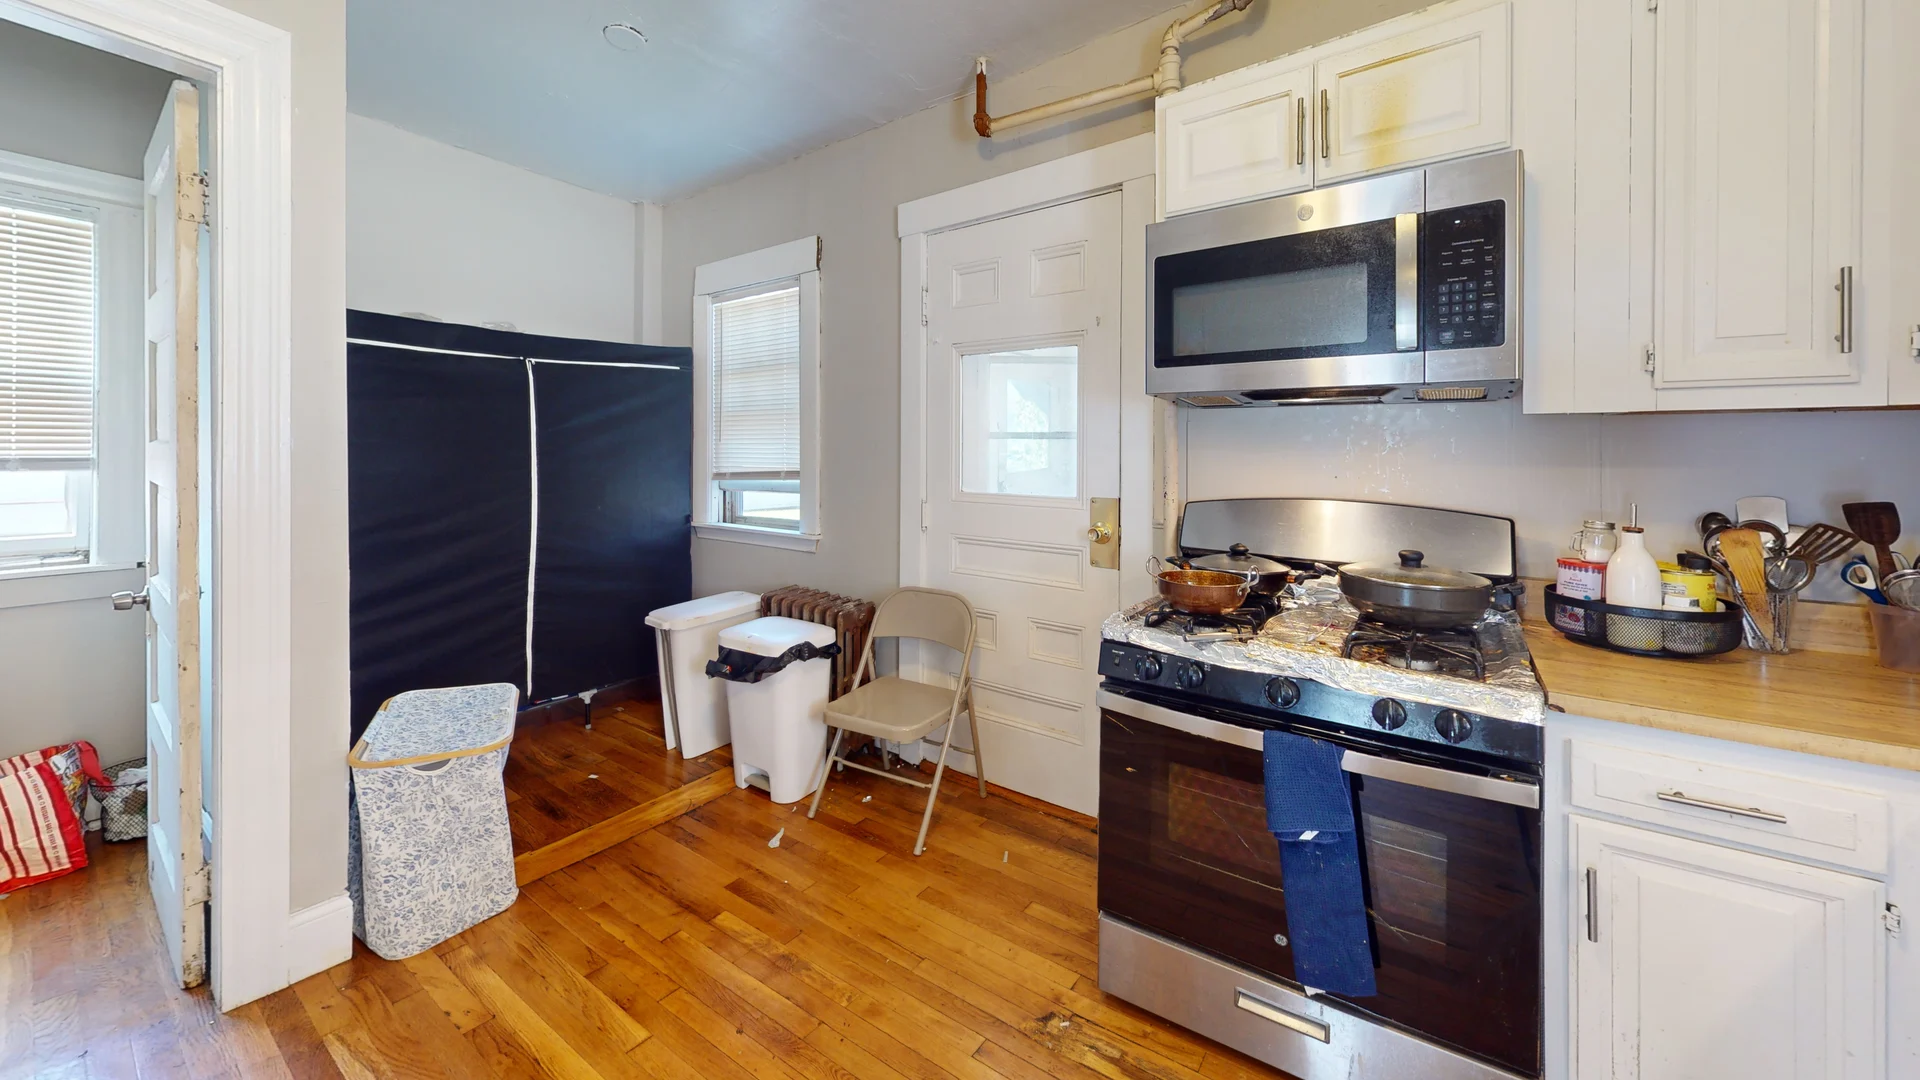 Photos of apartment on Langley Rd.,Boston MA 02135